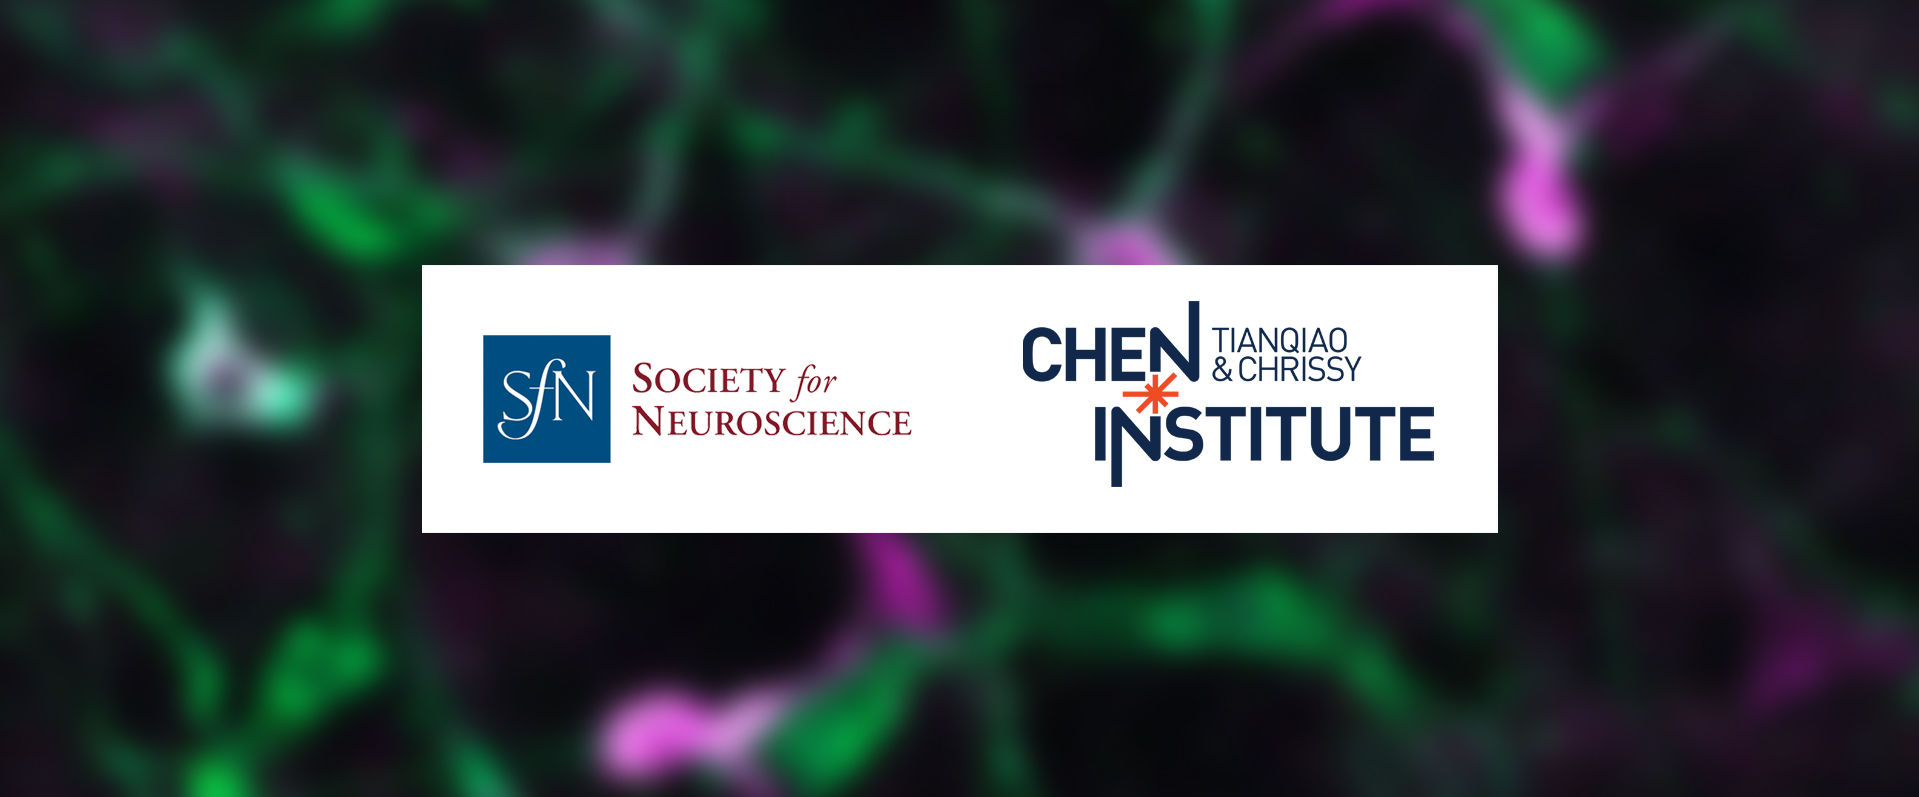 SfN Announces Partnership With the Tianqiao and Chrissy Chen Instituteto Support Early Career Scientists